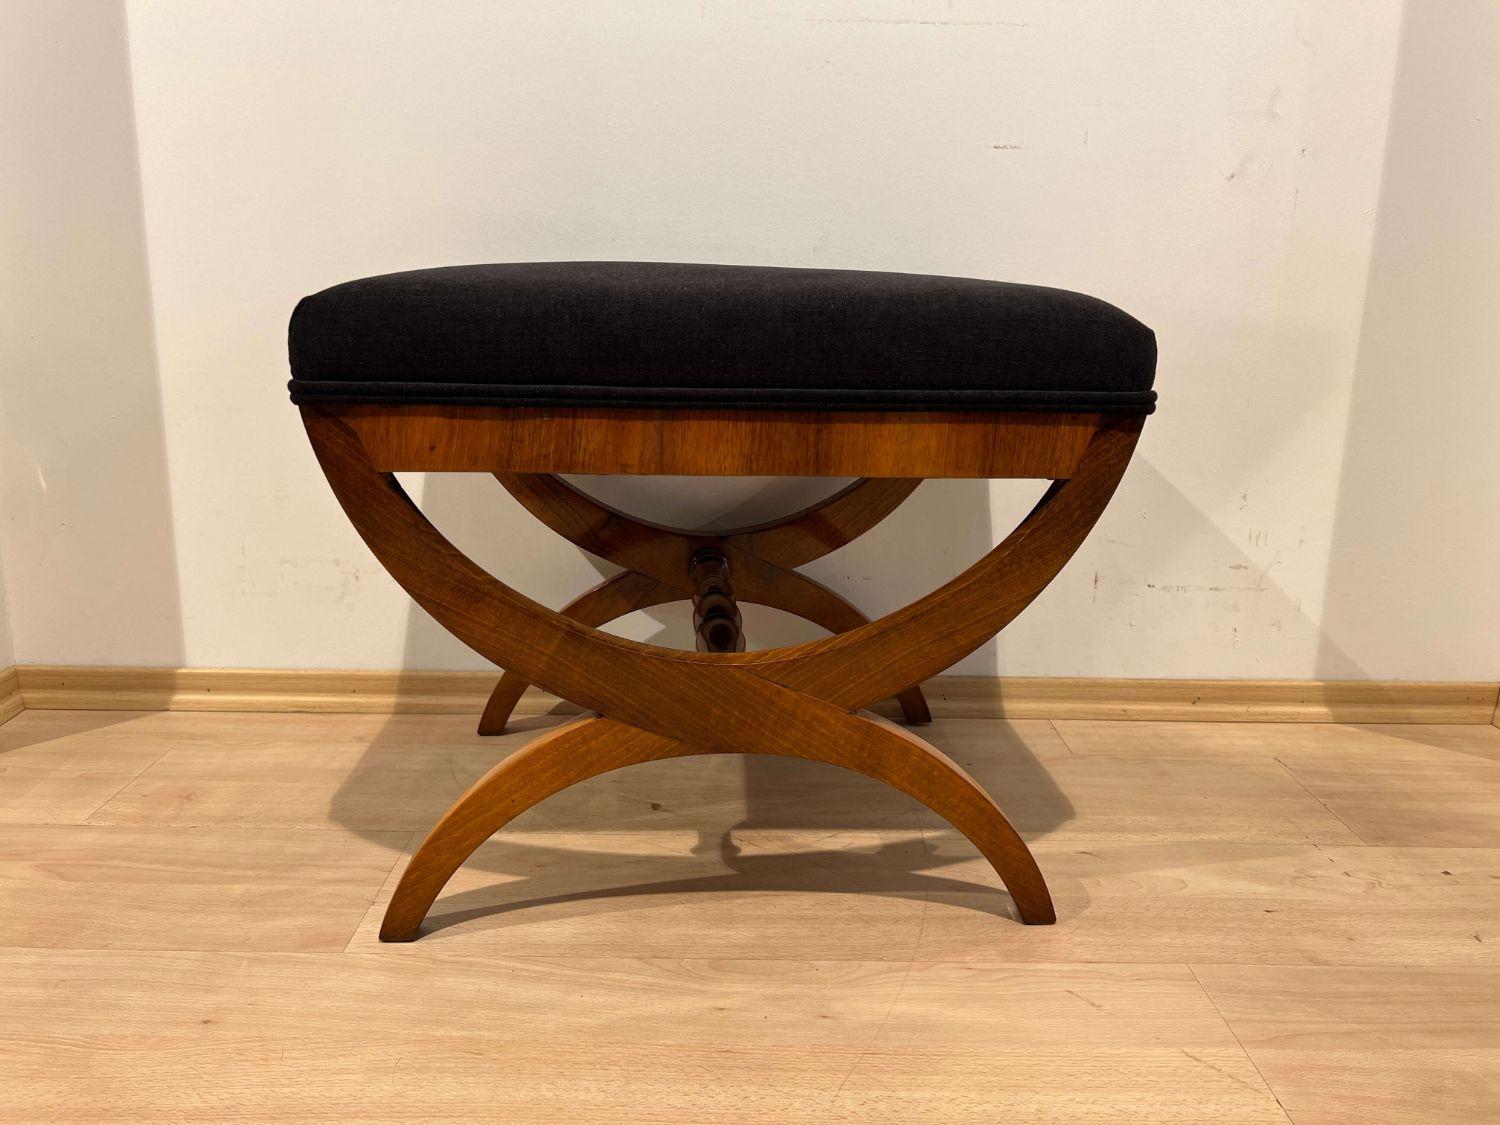 Large Biedermeier stool, walnut veneer and solid, South Germany circa 1820

Walnut veneered frame. Walnut solid legs and intermediate bar.
Newly upholstered and covered with black fabric. Restored and shellac hand polished

Dimensions:
H 51